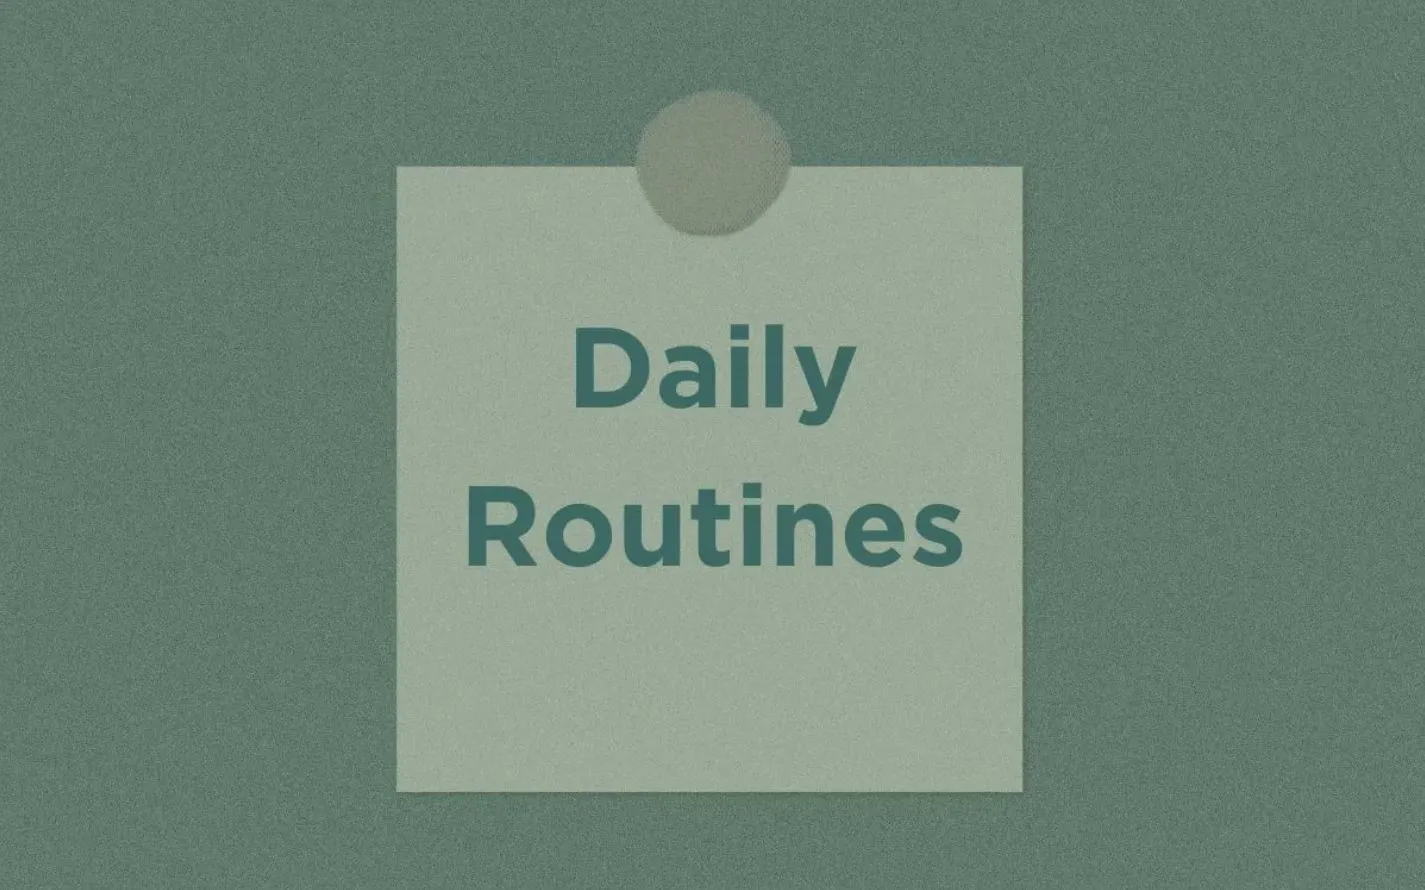 Daily Routine Sentences and Examples 